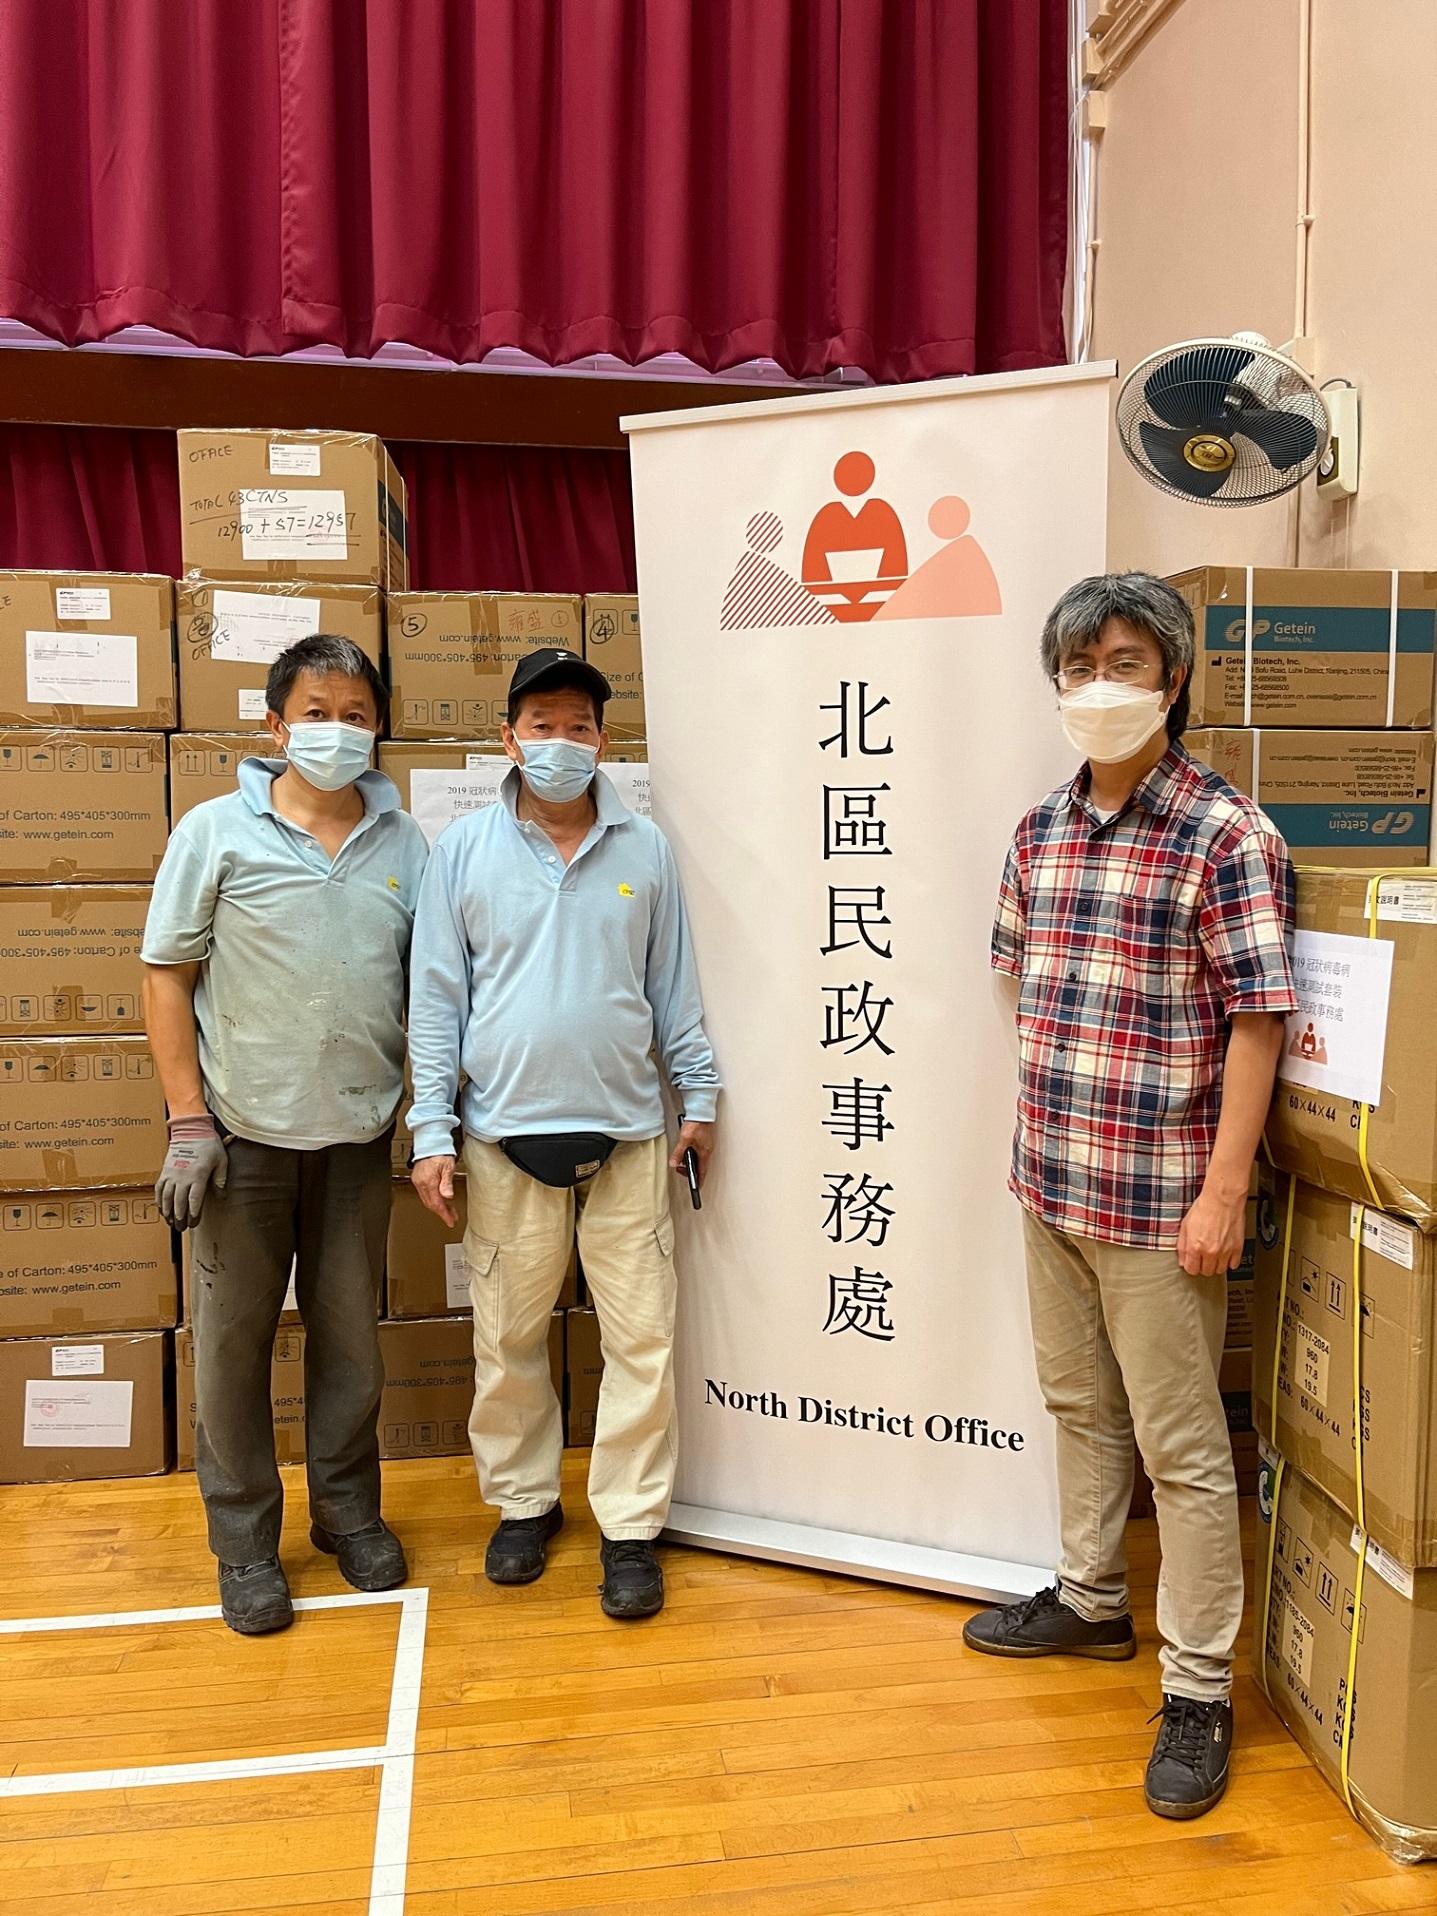 The North District Office today (August 1) distributed COVID-19 rapid test kits to households, cleansing workers and property management staff living and working in Yung Shing Court for voluntary testing through the property management company.

